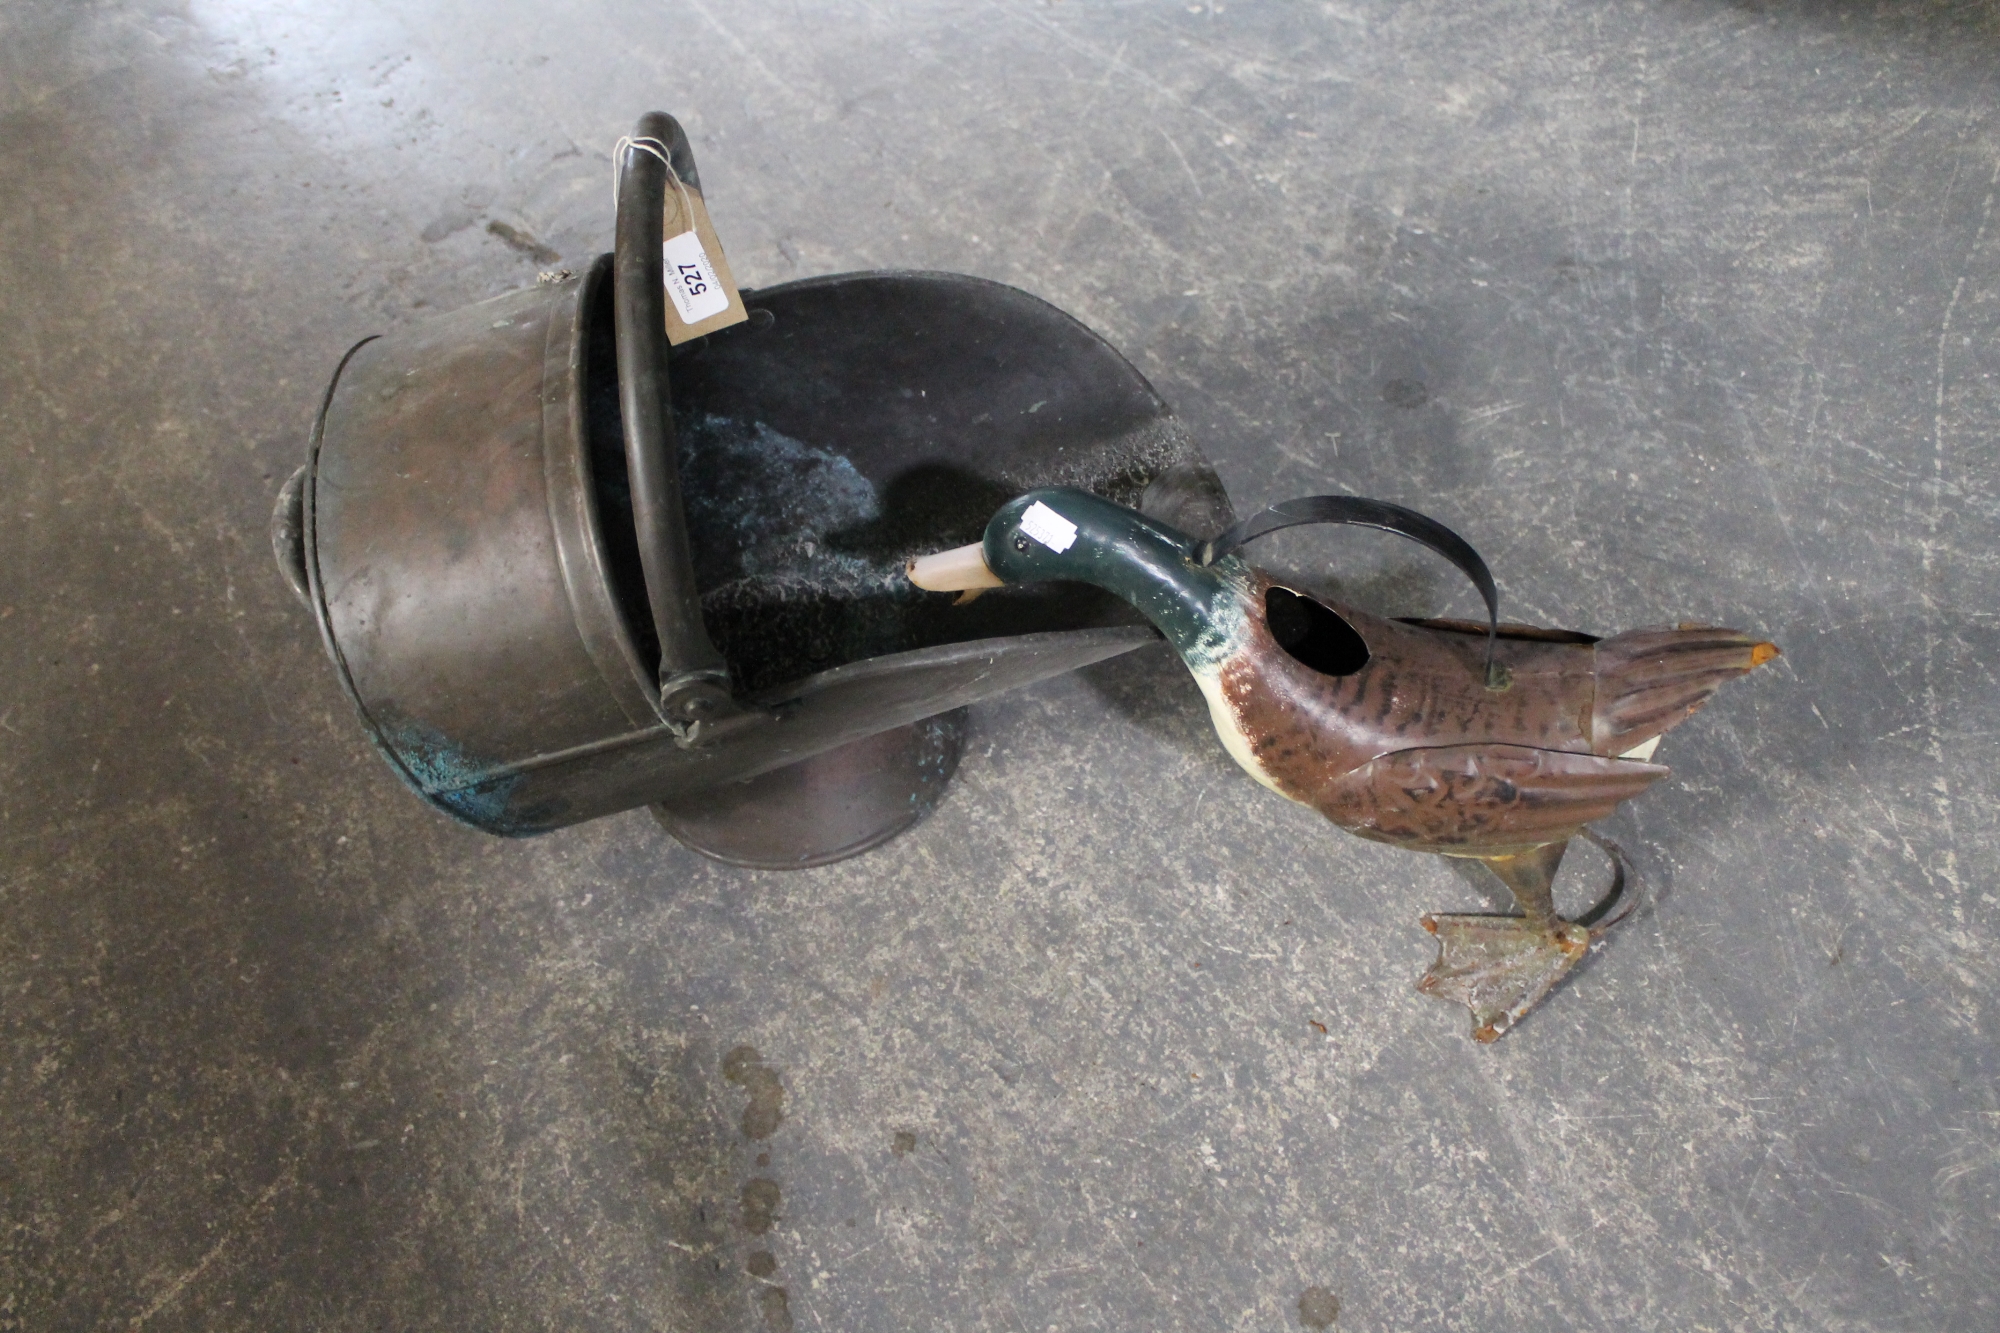 An antique copper coal helmet together with a metal figure of a duck